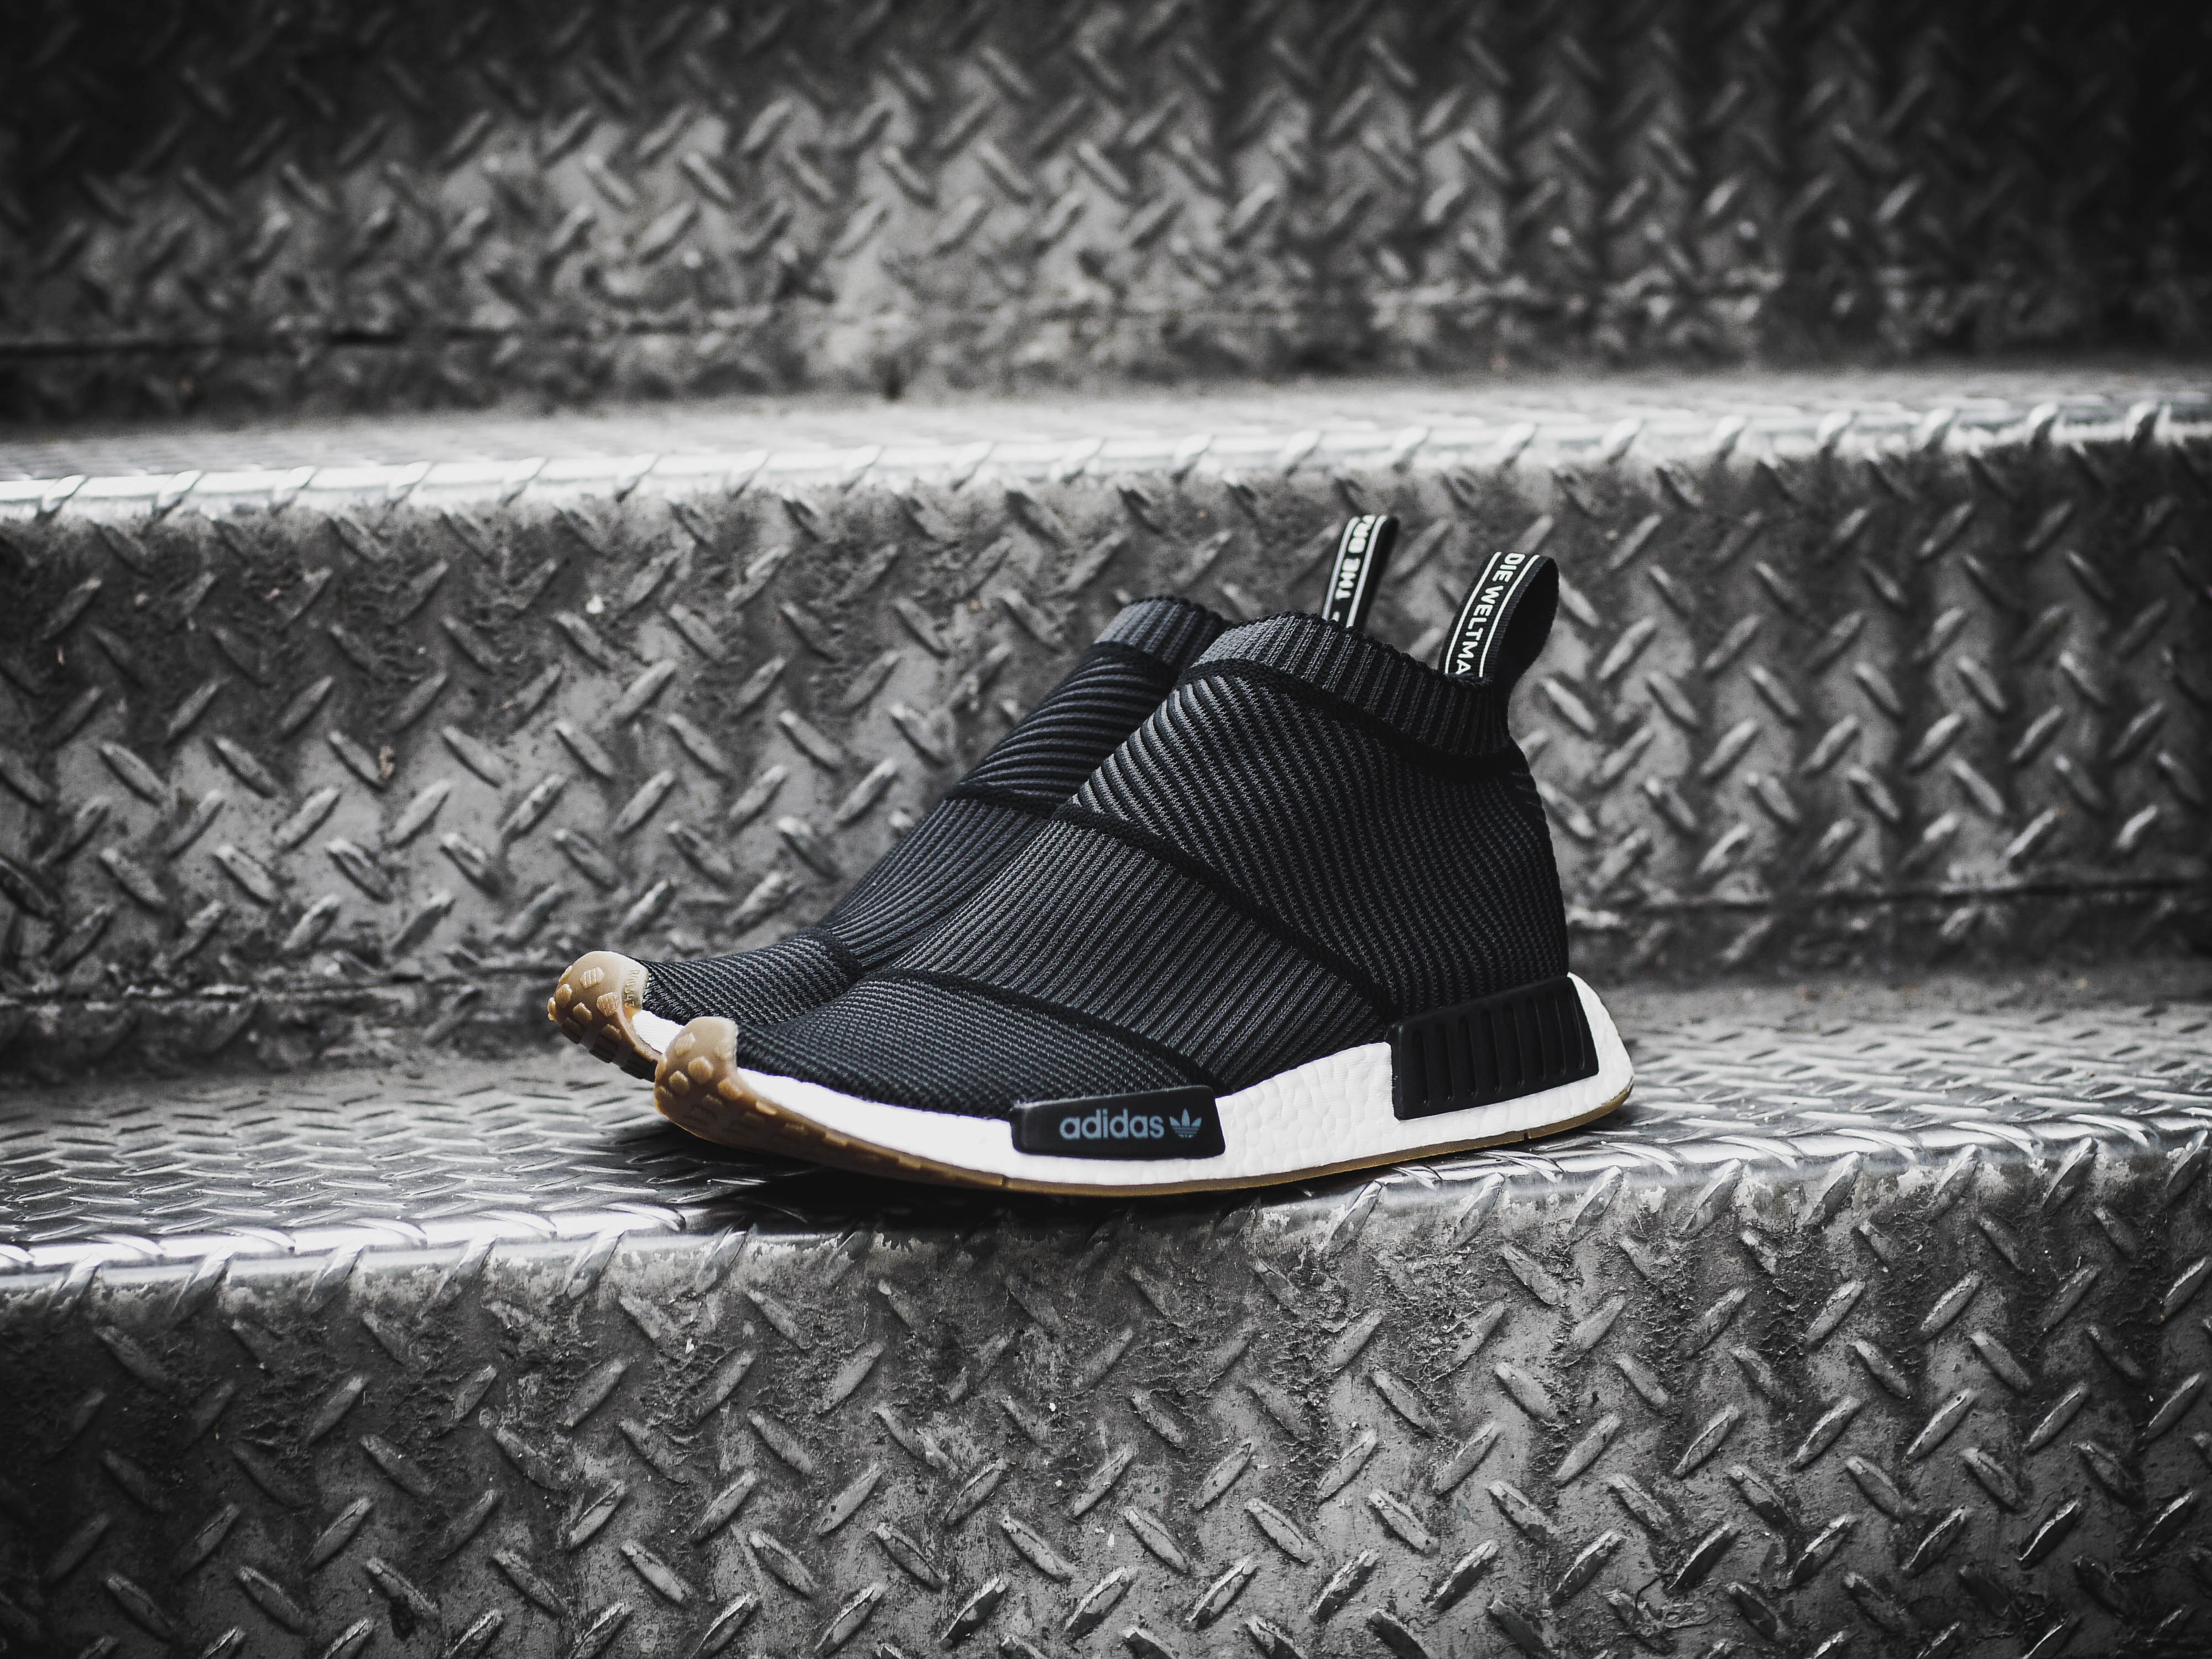 The adidas NMD City Sock ‘Gum Pack’ & The R2 Make a Pretty Couple